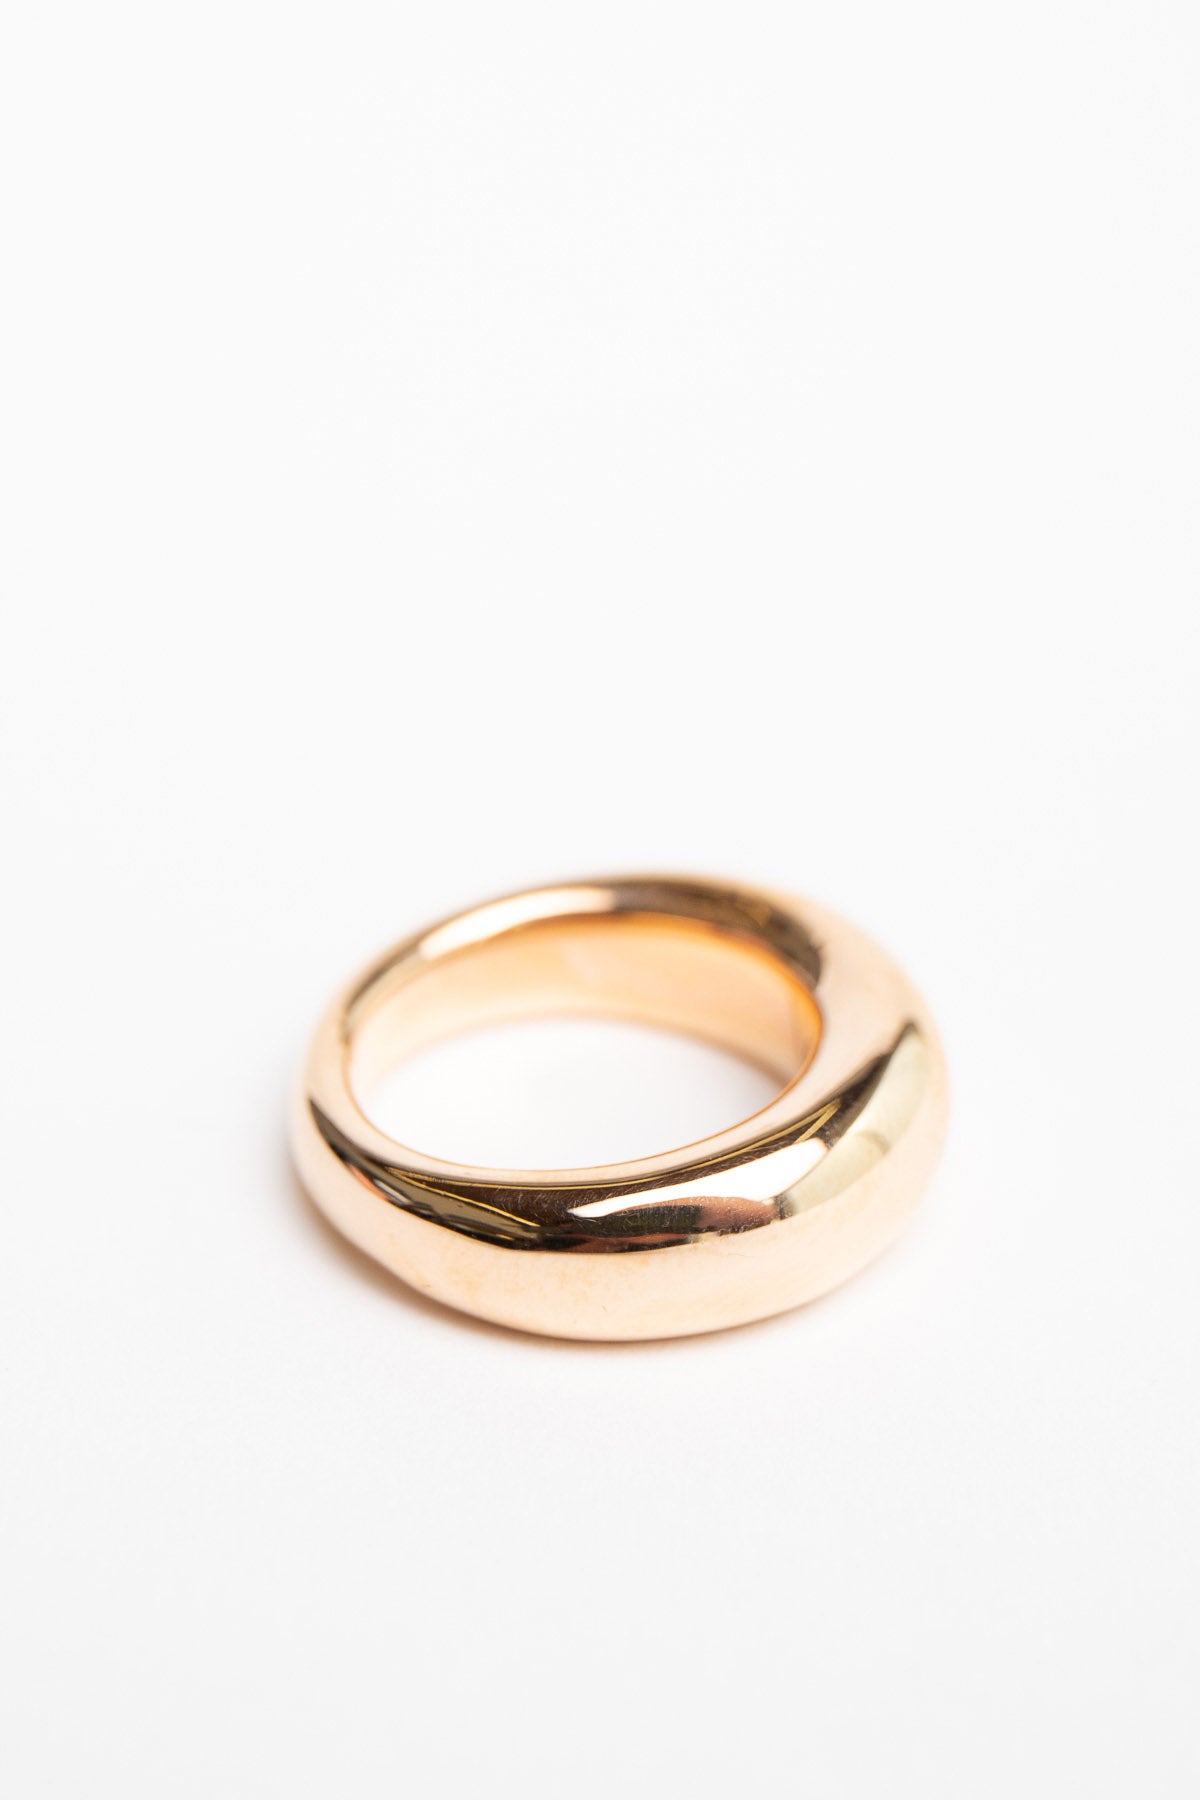 MAUD JEWELRY | 18K ROSE GOLD LOW DOME RING